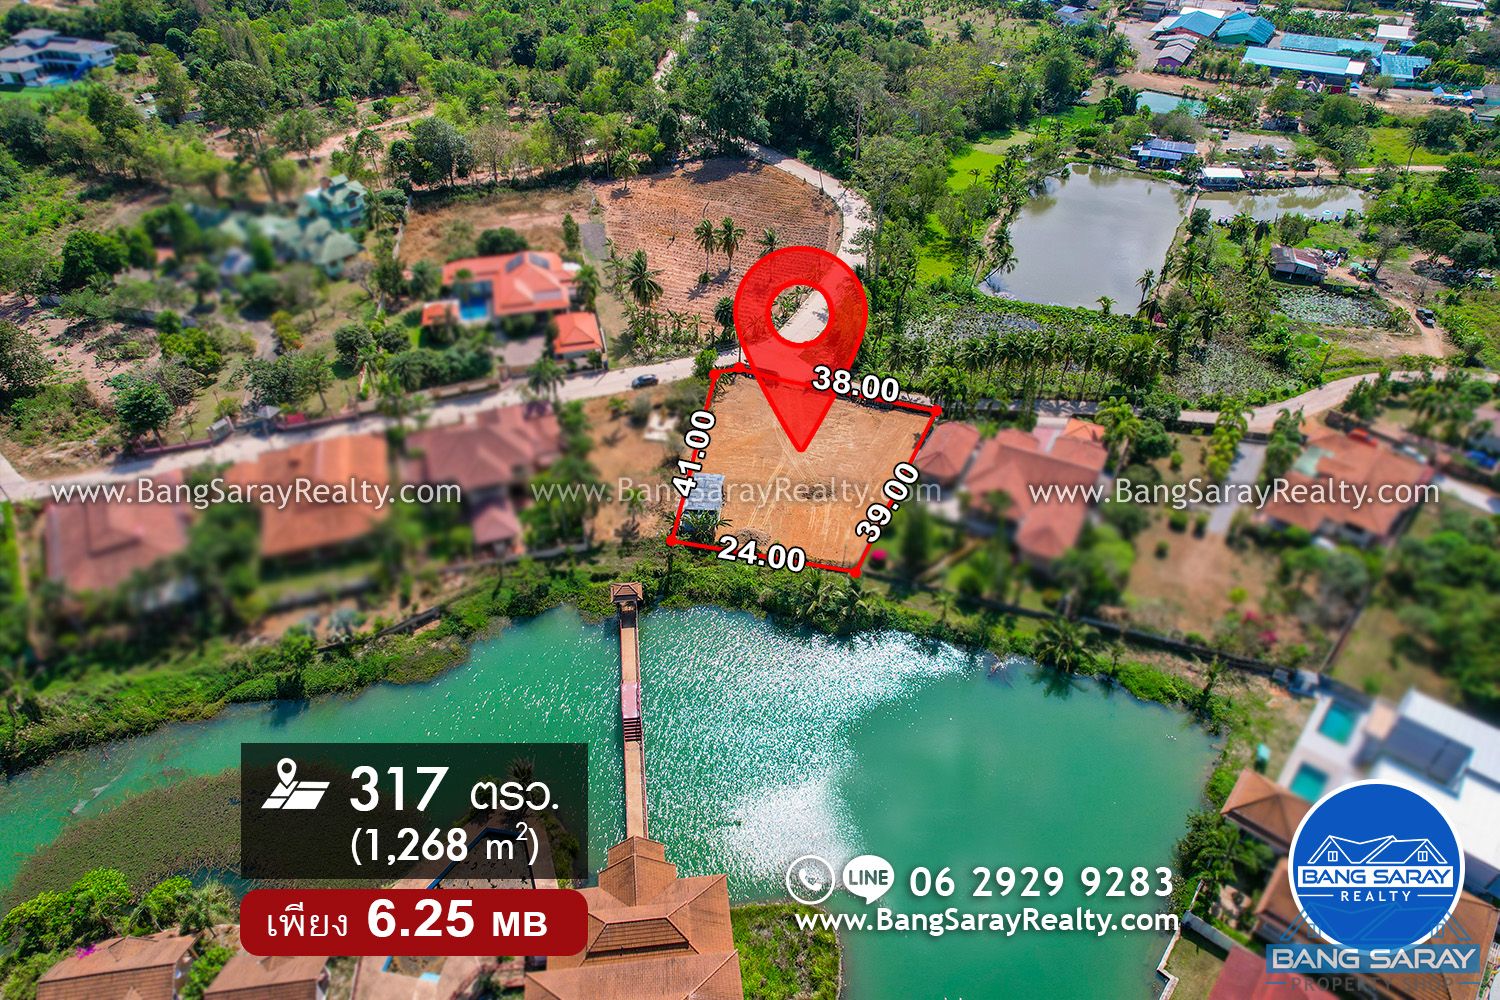 Lakefront Land for Sale 317 sqw, Near Khao Chee Chan ที่ดิน  สำหรับขาย